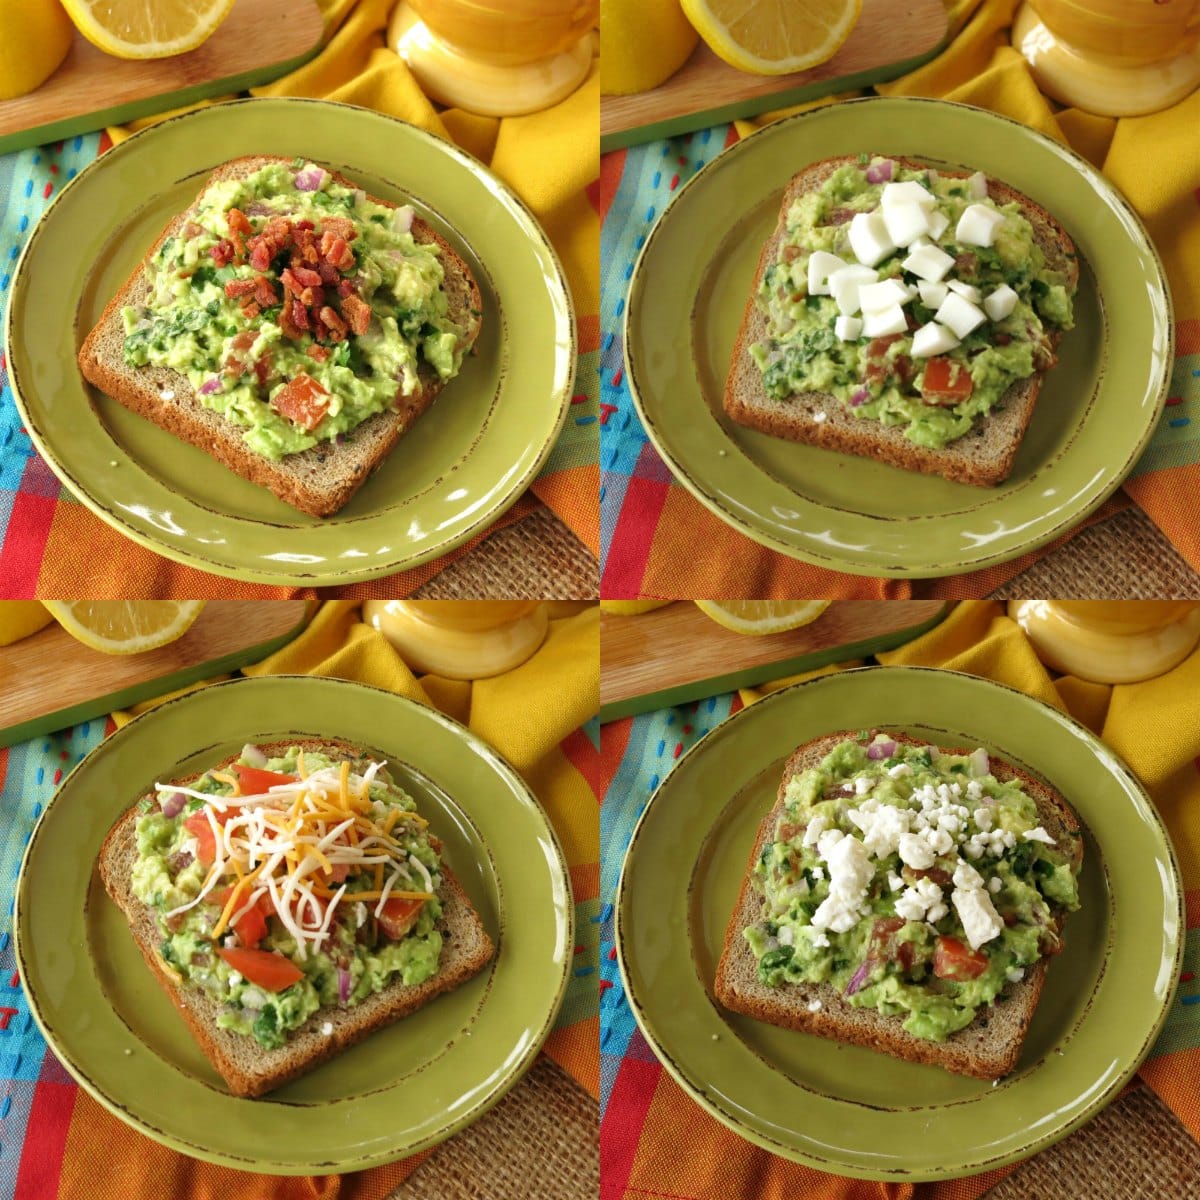 Breakfast Guacamole Toast Recipe and Topping Ideas - The